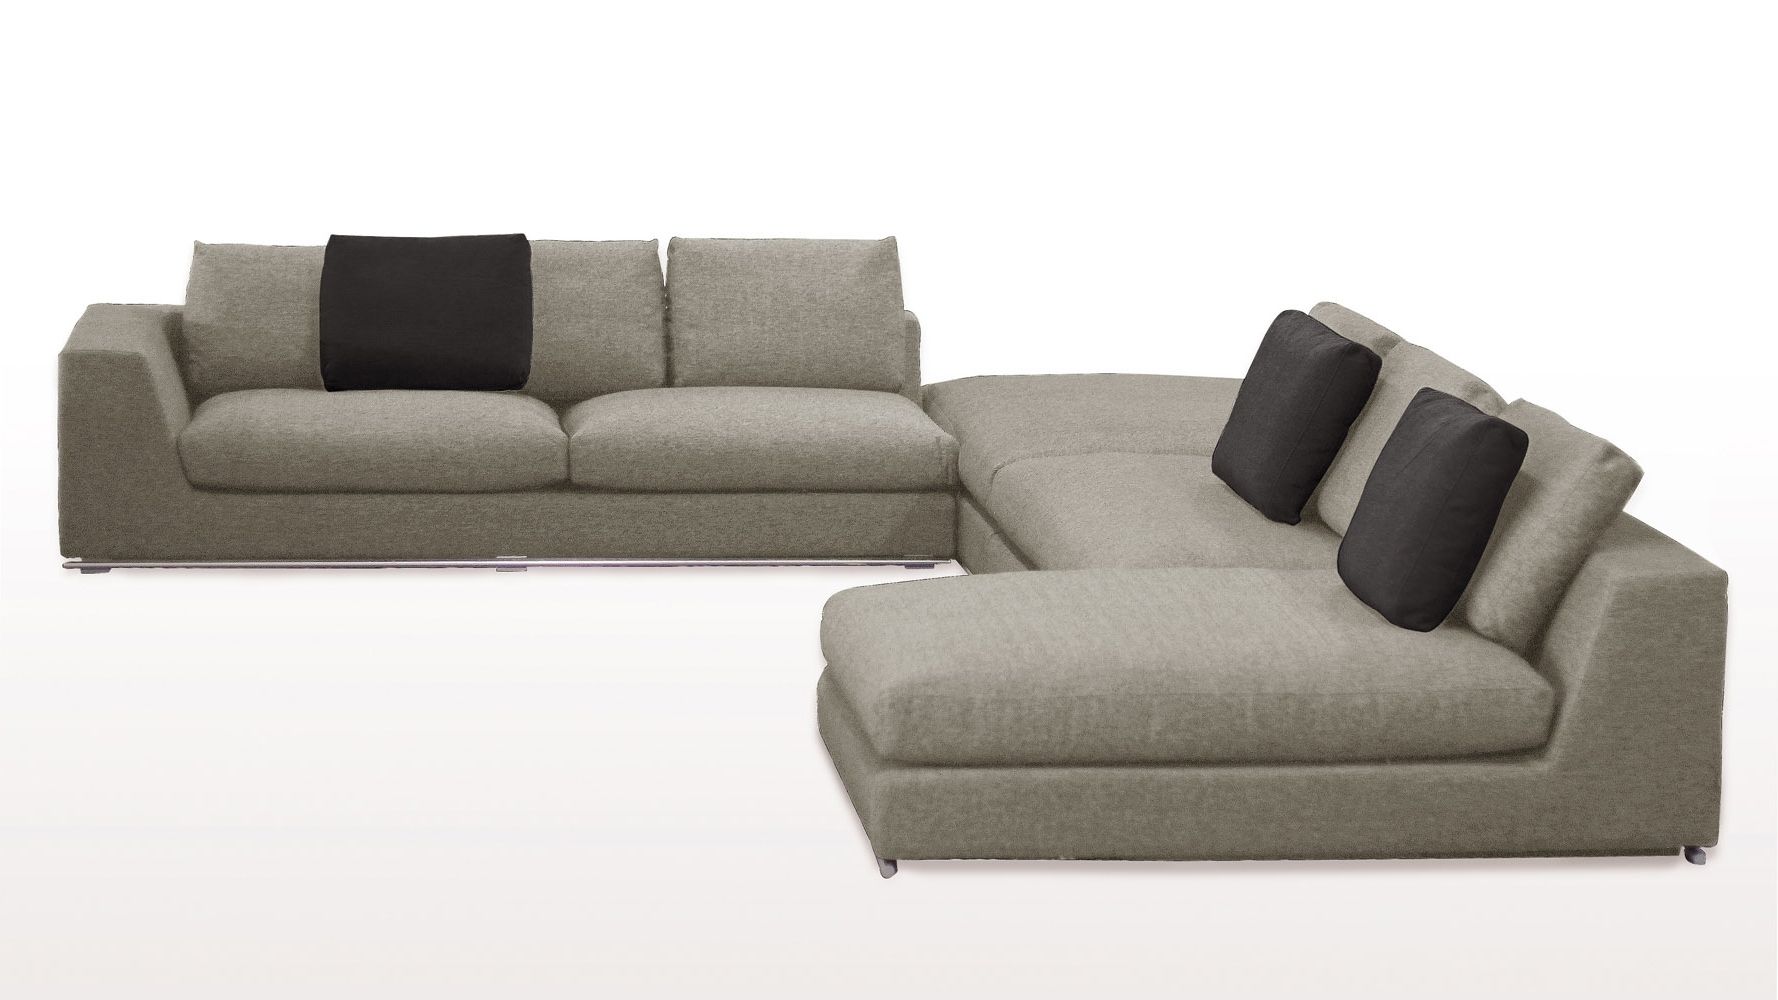 Newest Armless Sectional Sofas Throughout Fancy Armless Sectional Sofa 53 On Sofa Room Ideas With Armless (Photo 1 of 15)